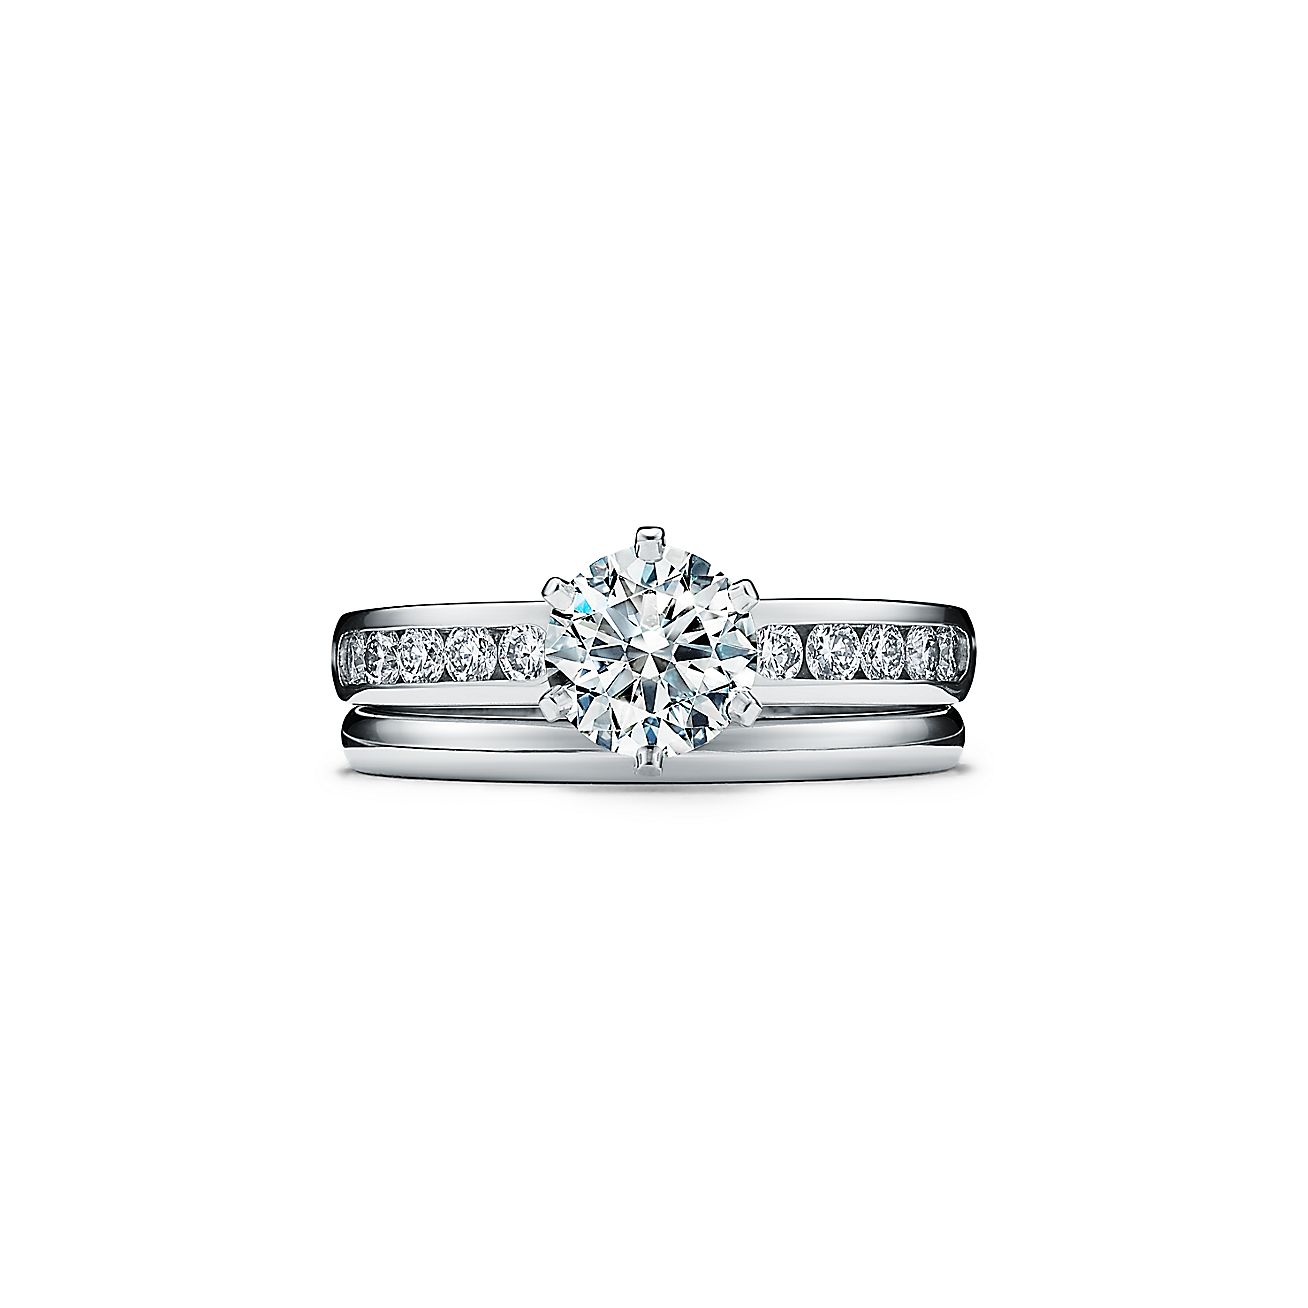 The Tiffany® Setting Engagement Ring with a Channel-set Diamond